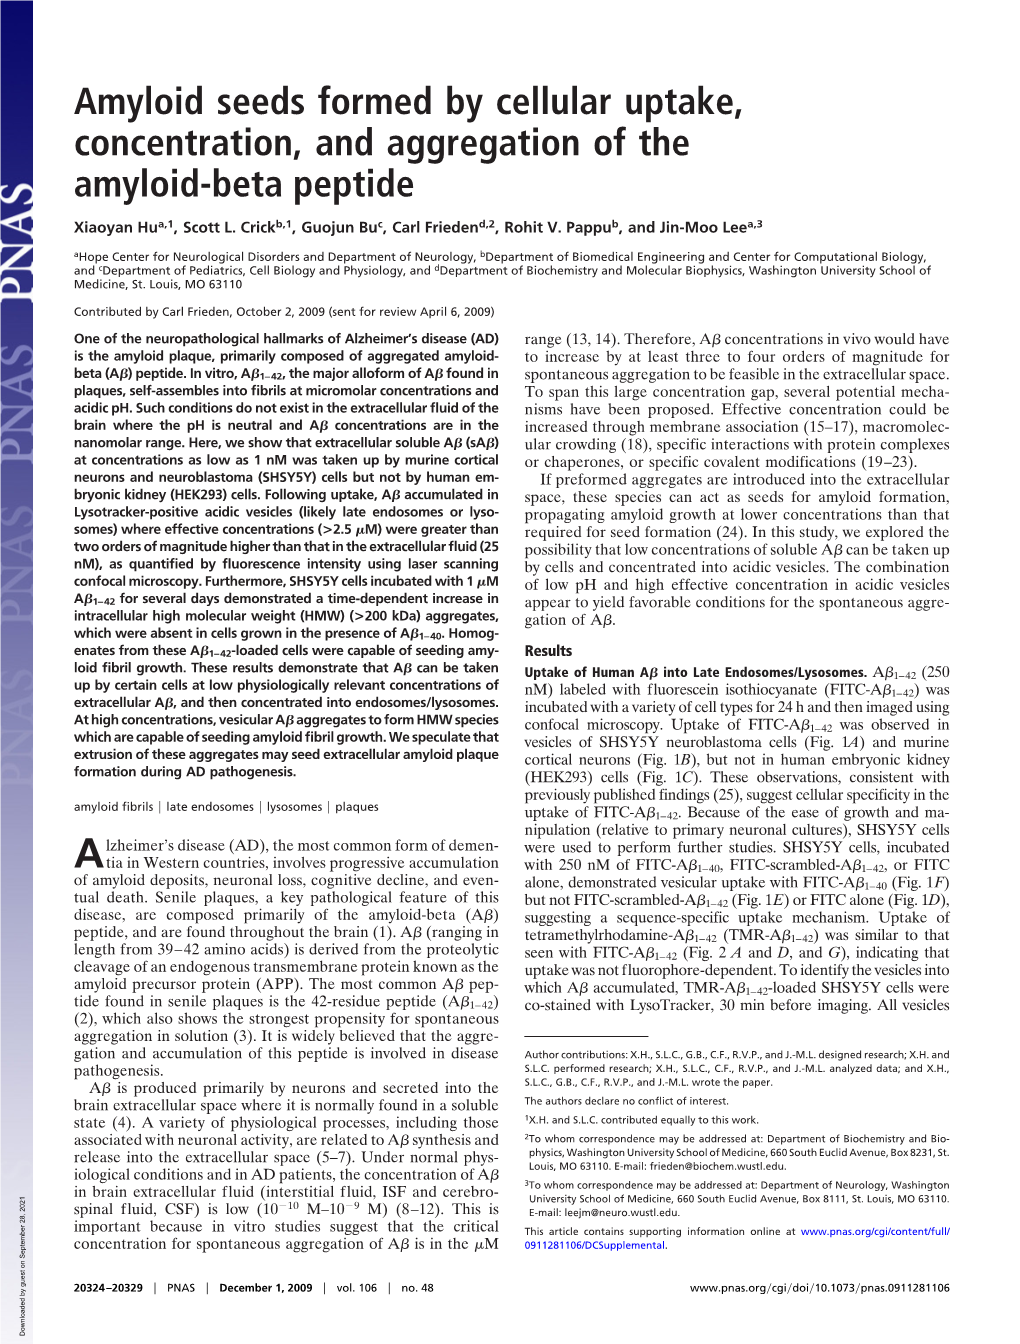 Amyloid Seeds Formed by Cellular Uptake, Concentration, and Aggregation of the Amyloid-Beta Peptide